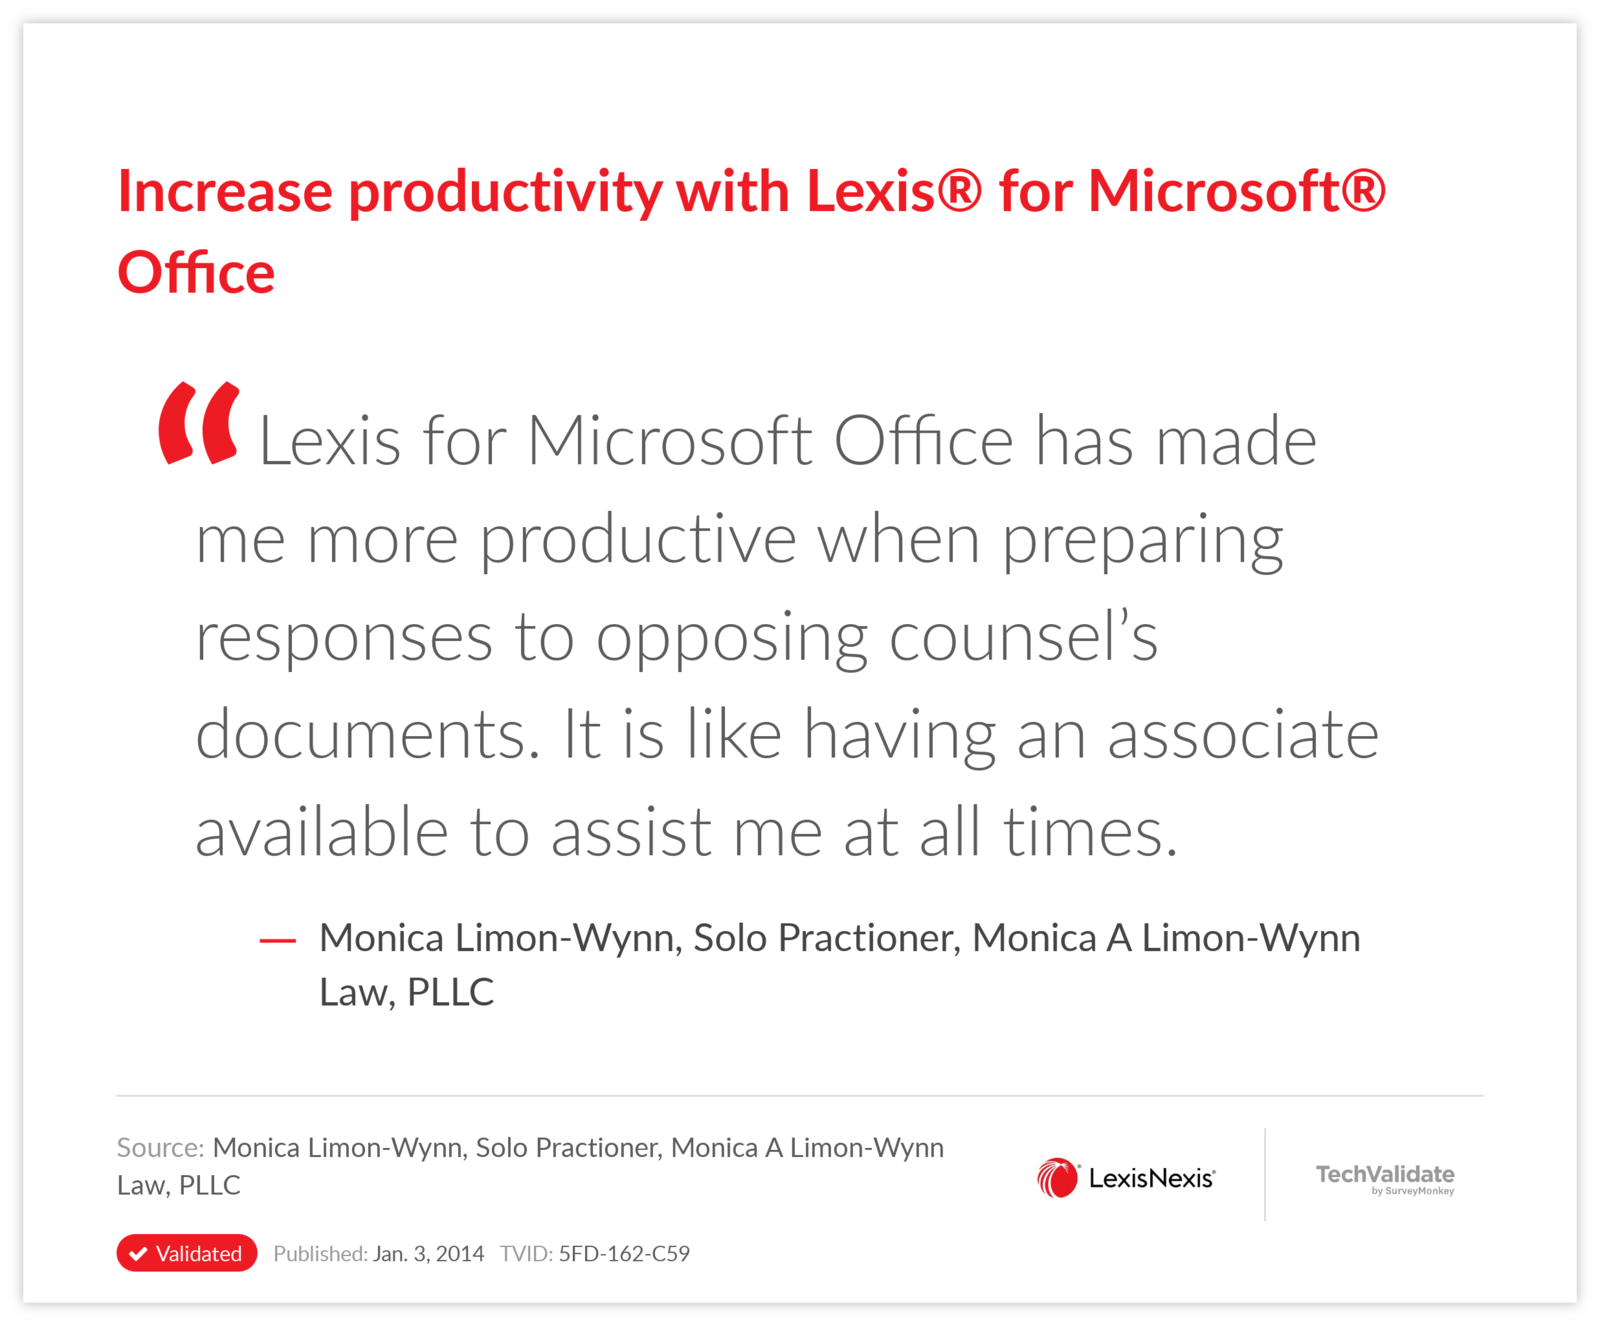 Increase productivity with Lexis® for Microsoft® Office